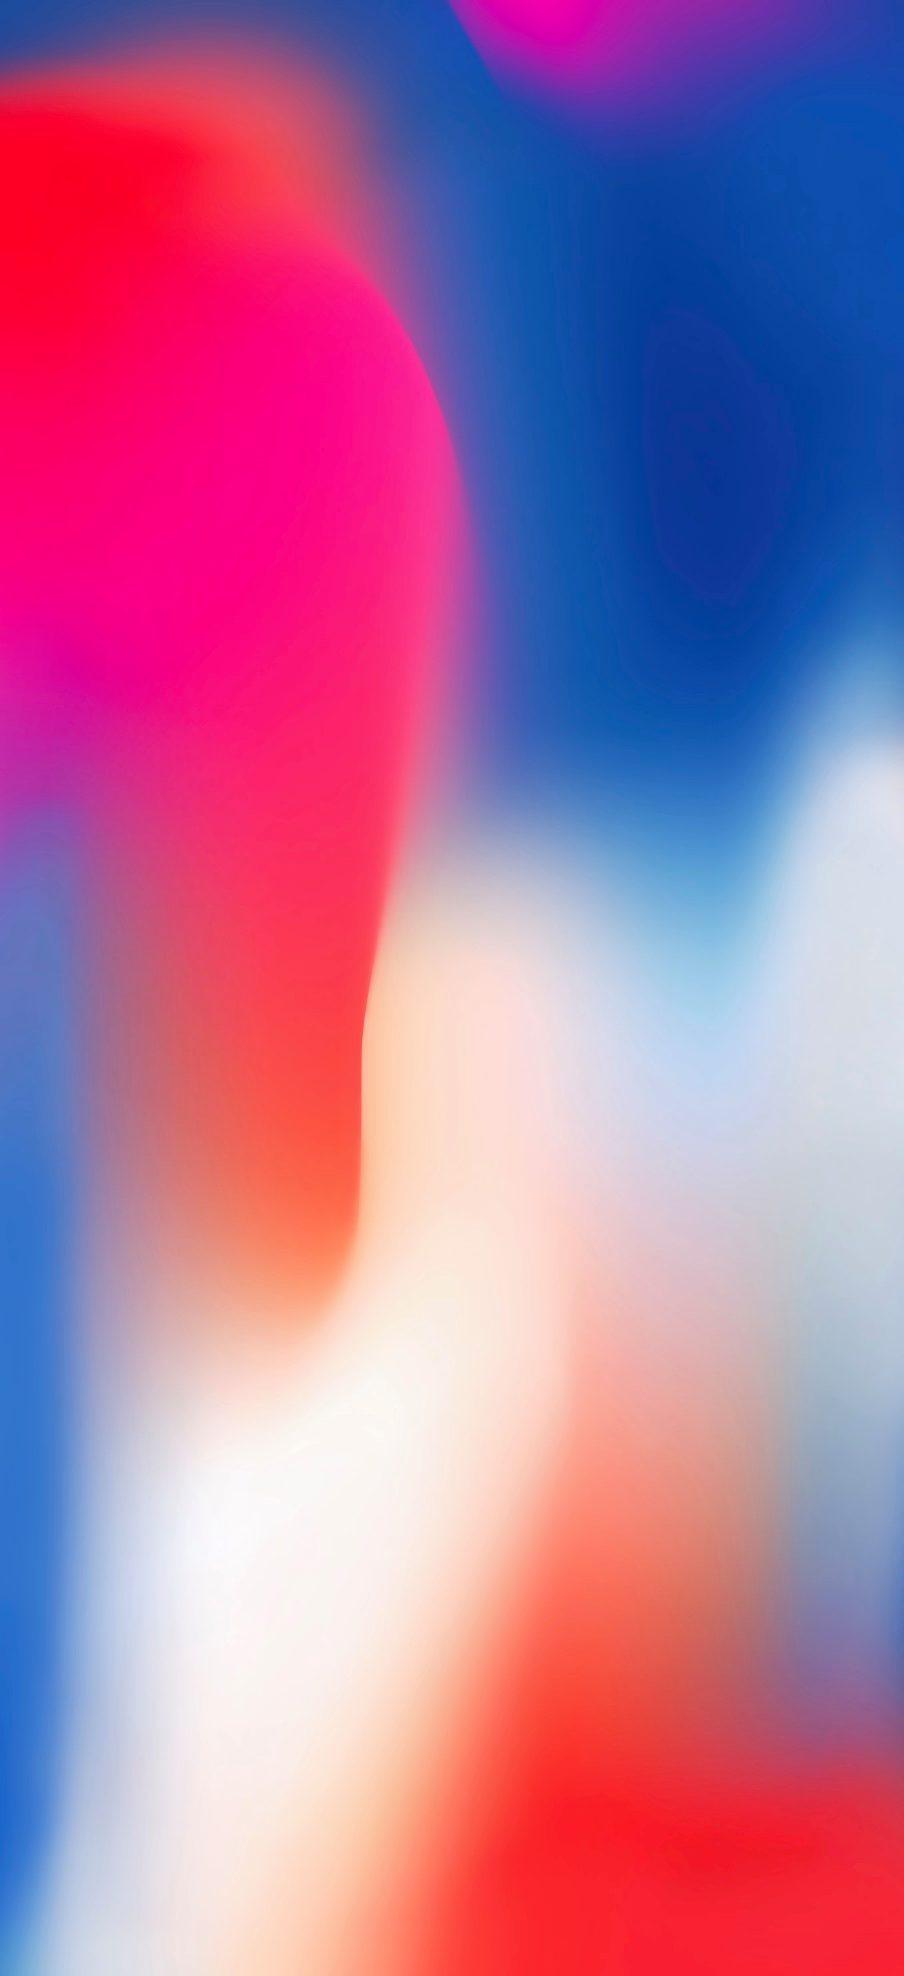 iPhone X features 7 new Dynamic and 6 new Live wallpapers [Gallery]